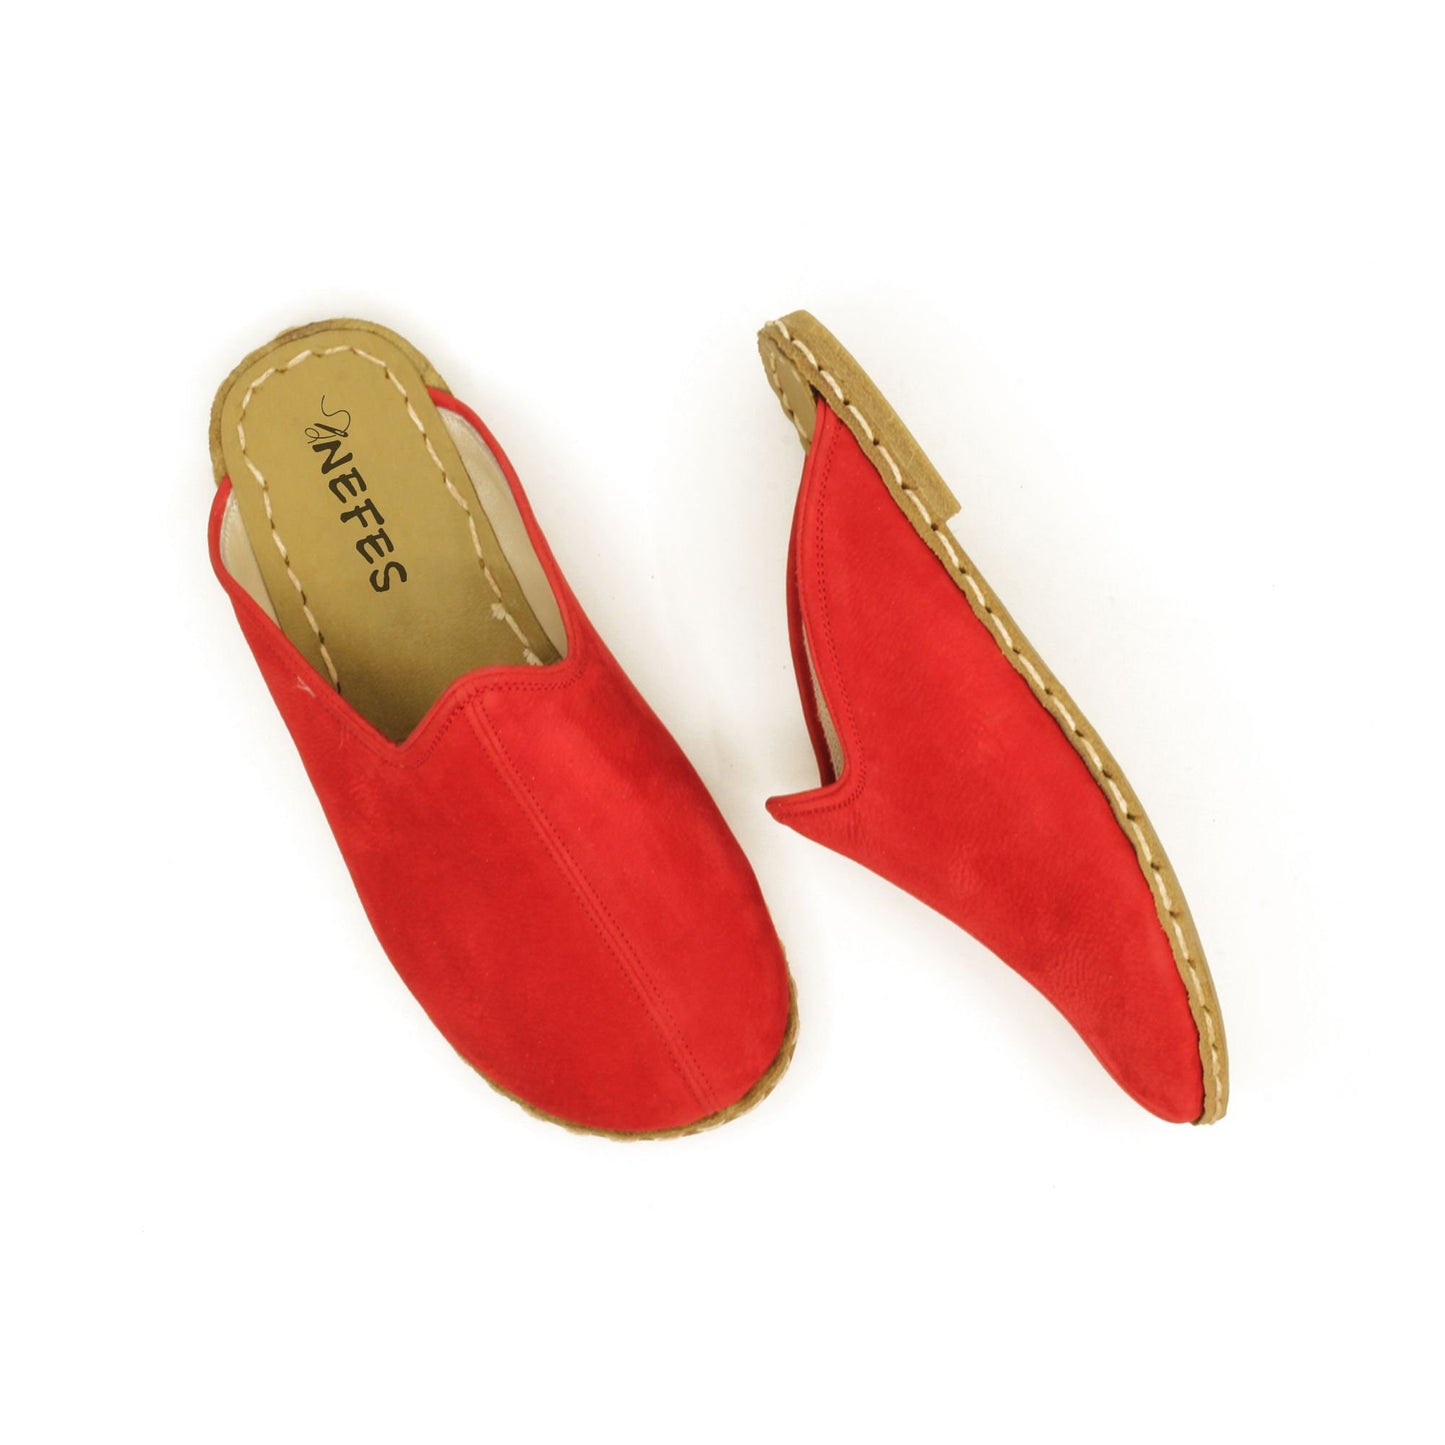 Barefoot - close toed slippers - Red nubuck leather - Winter Slippers - For Women